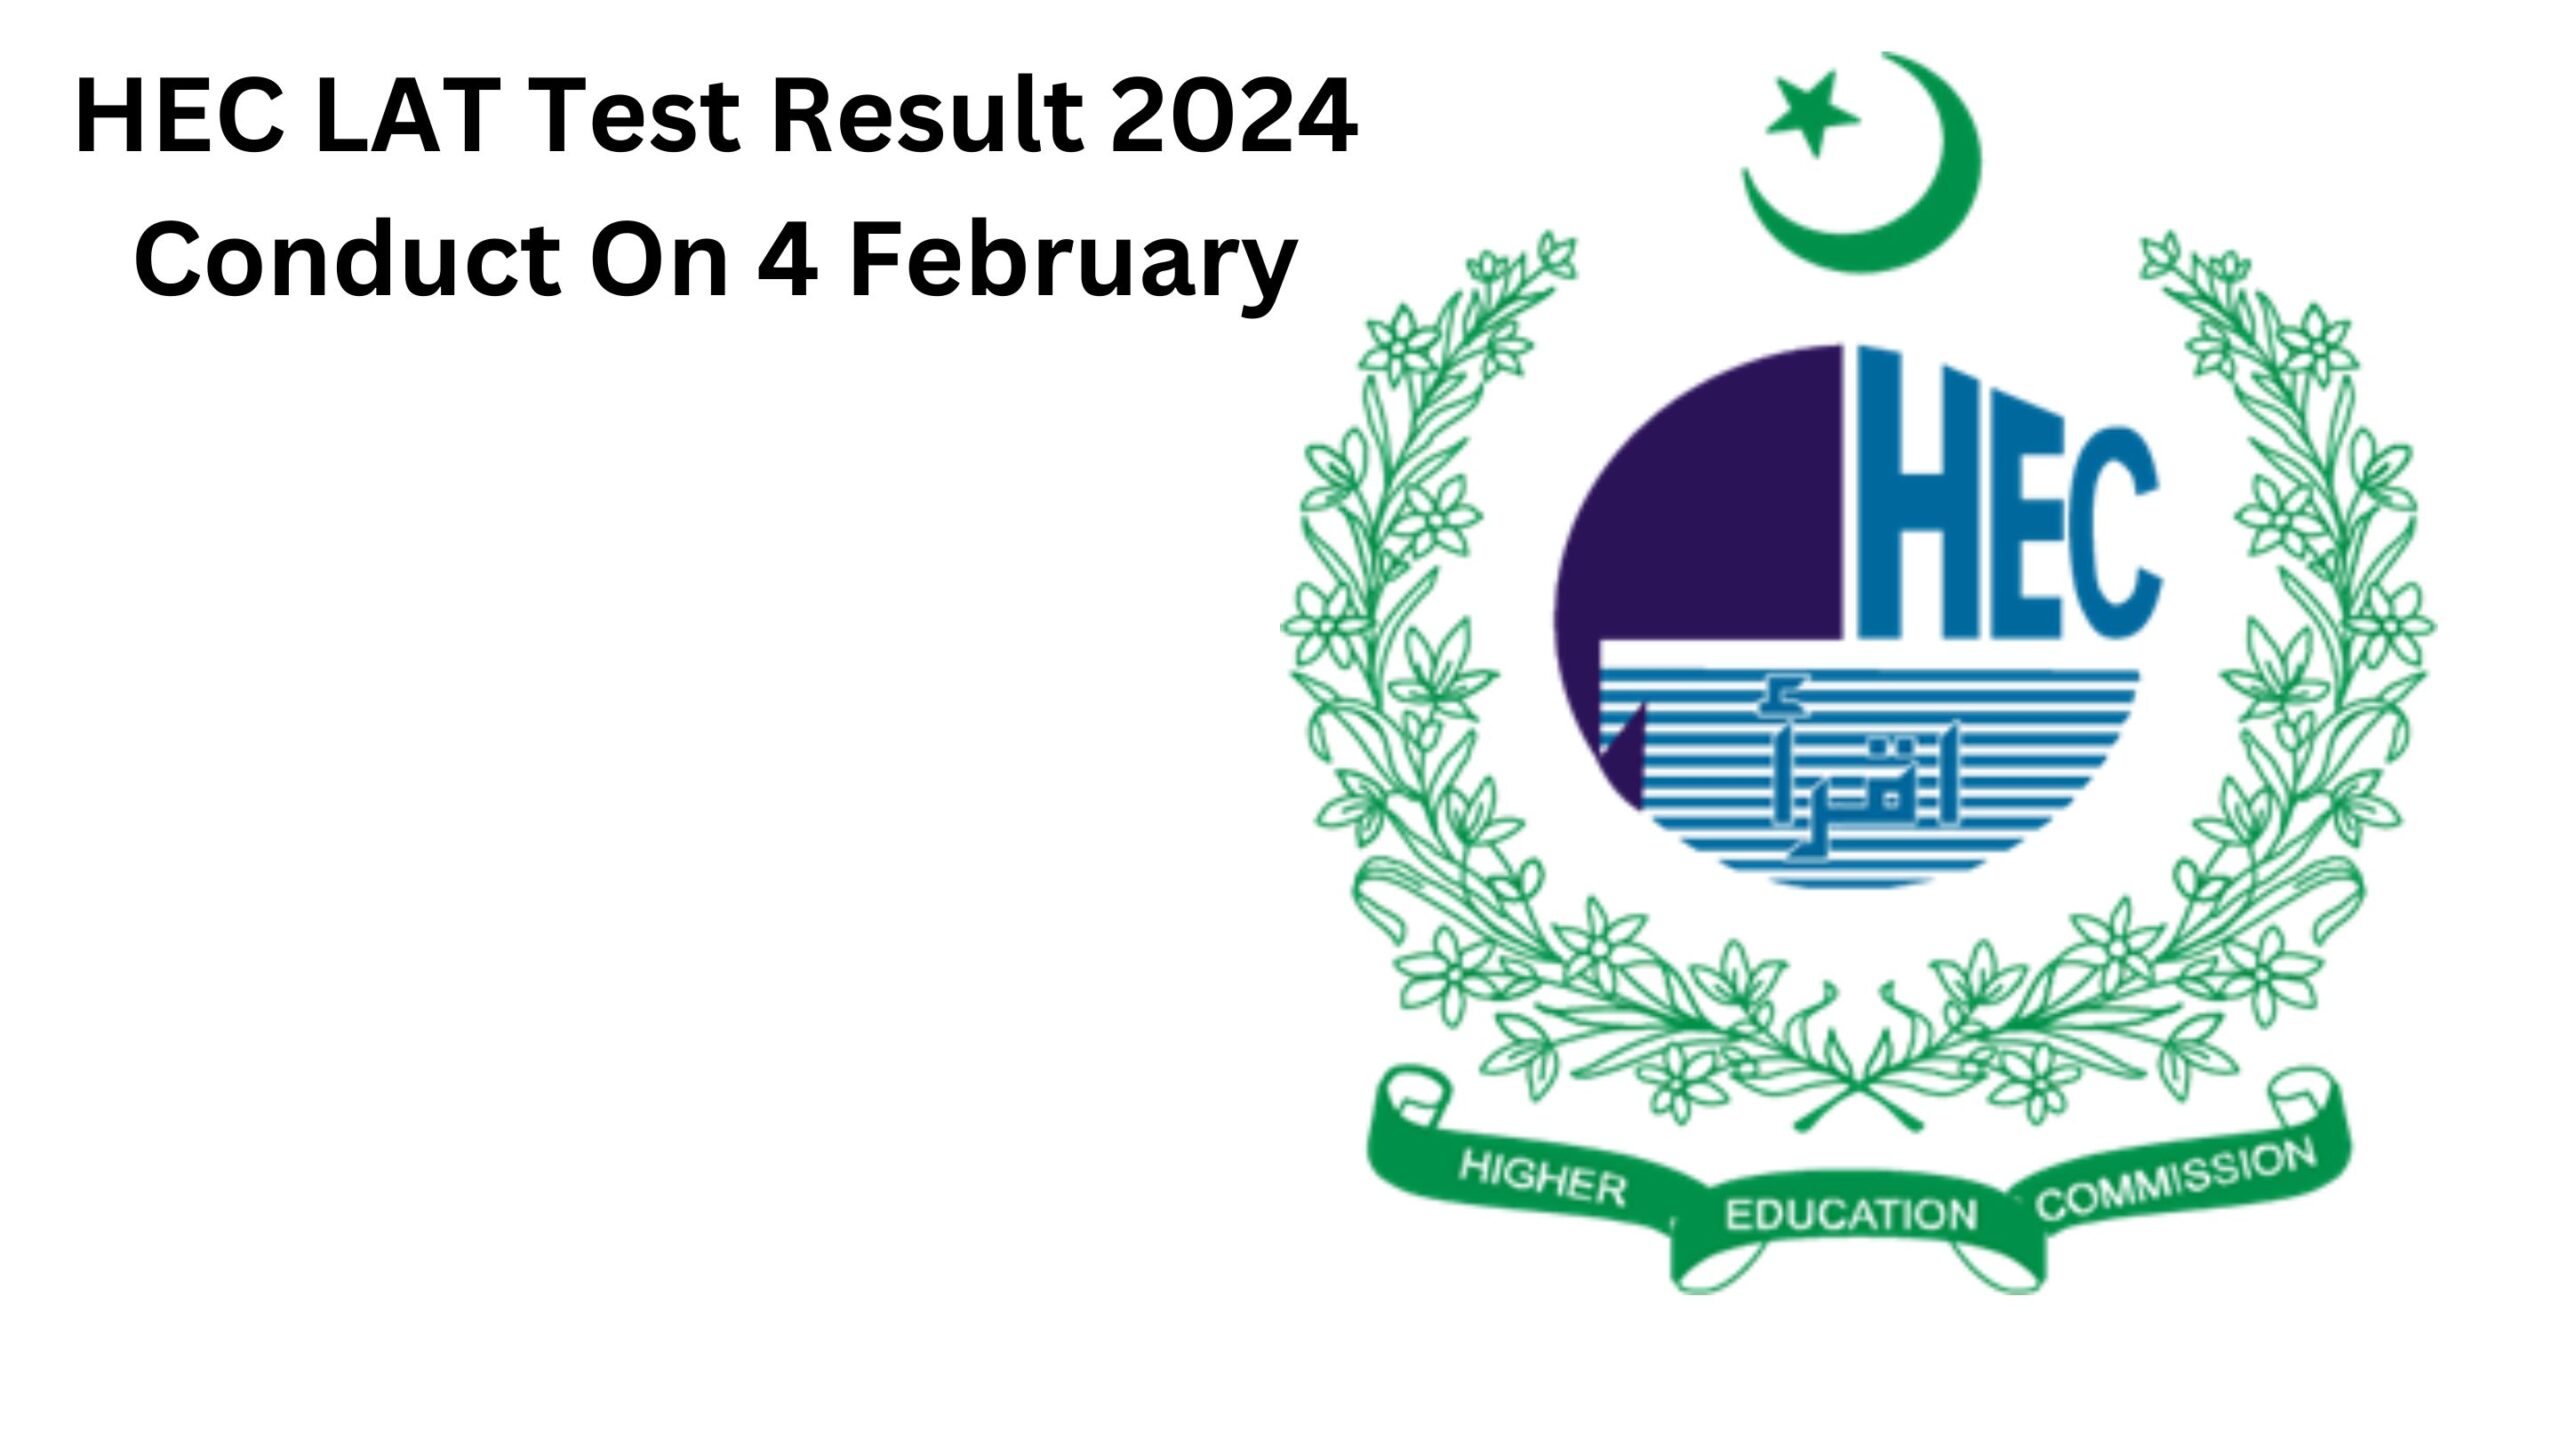 HEC LAT Test Result 2024 Conduct On 4 February 